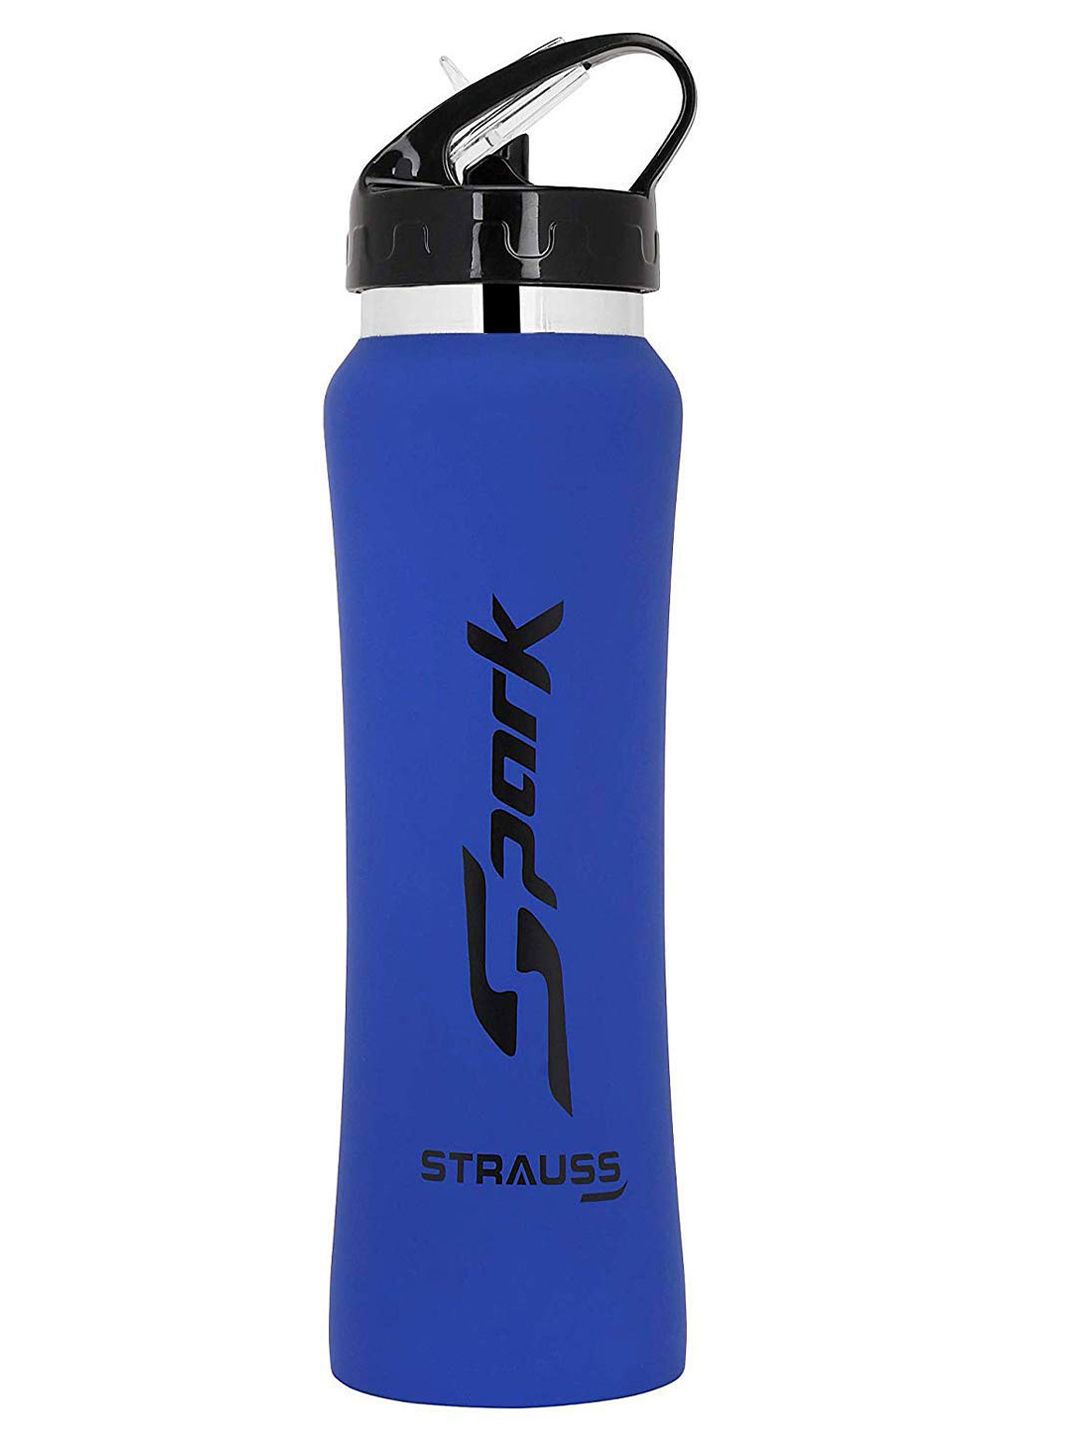 STRAUSS Blue & Black Solid Stainless-Steel Water Bottle Price in India